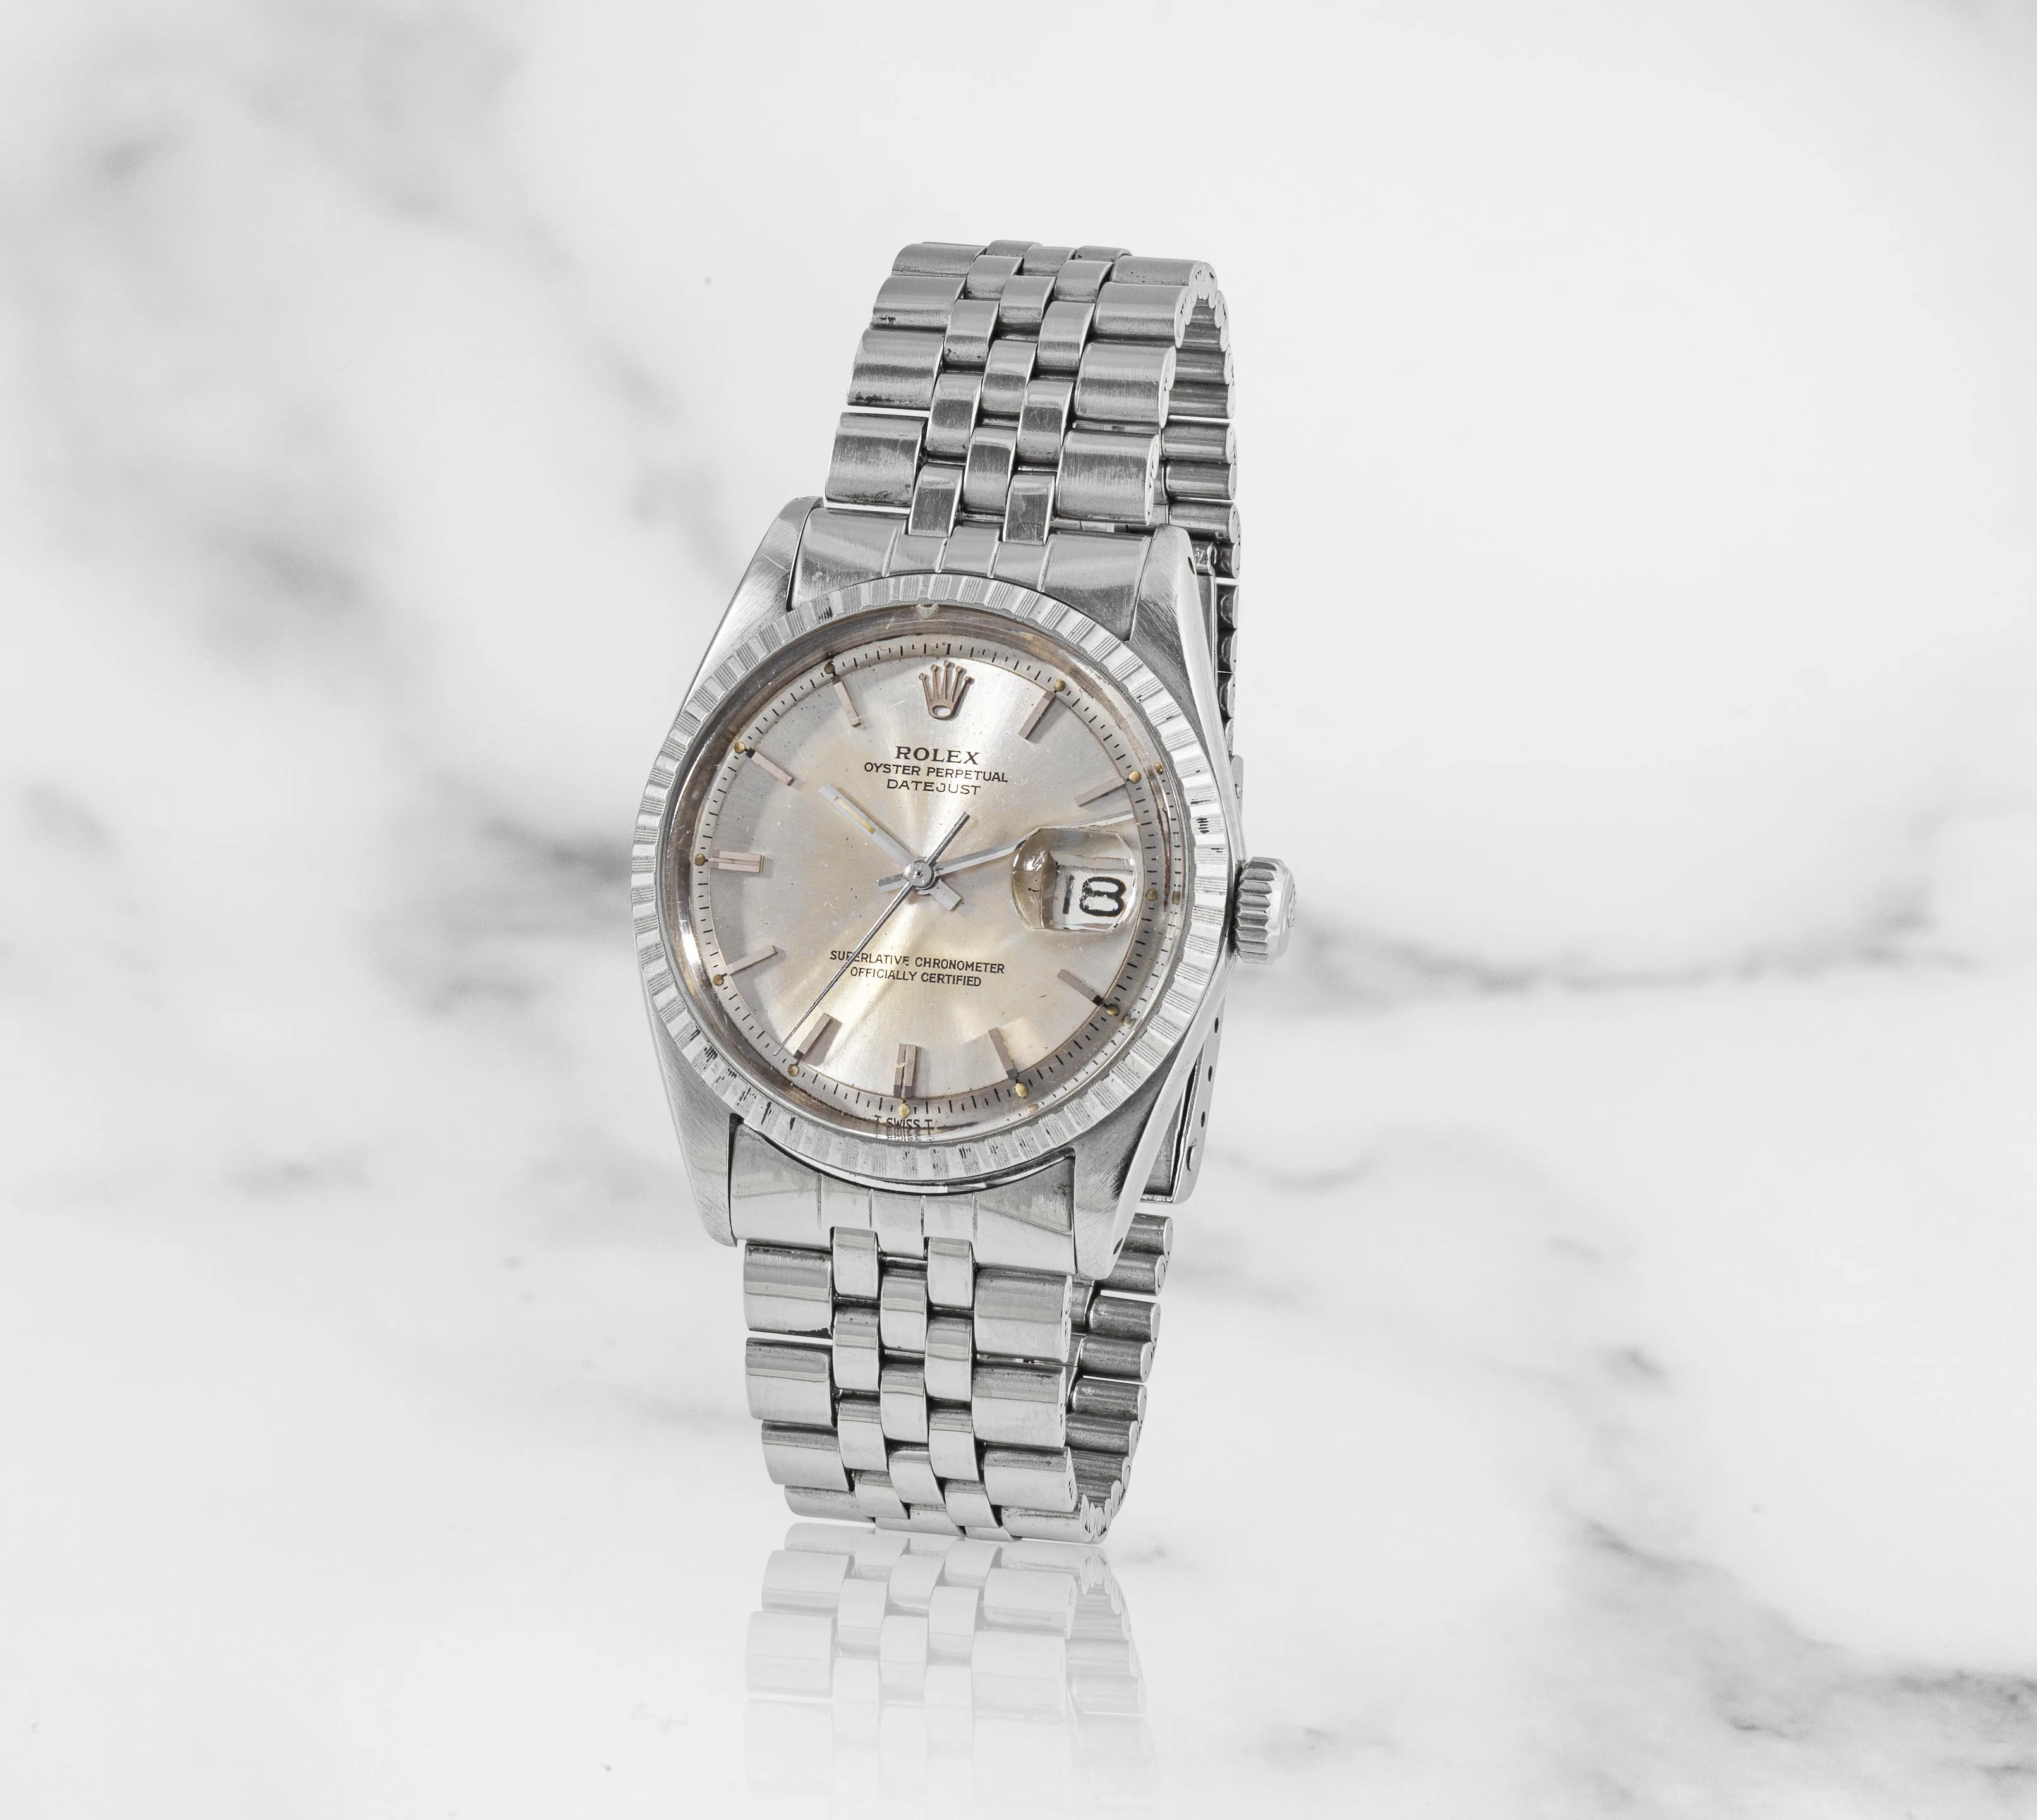 Rolex Datejust 1603 35mm Stainless steel Silver